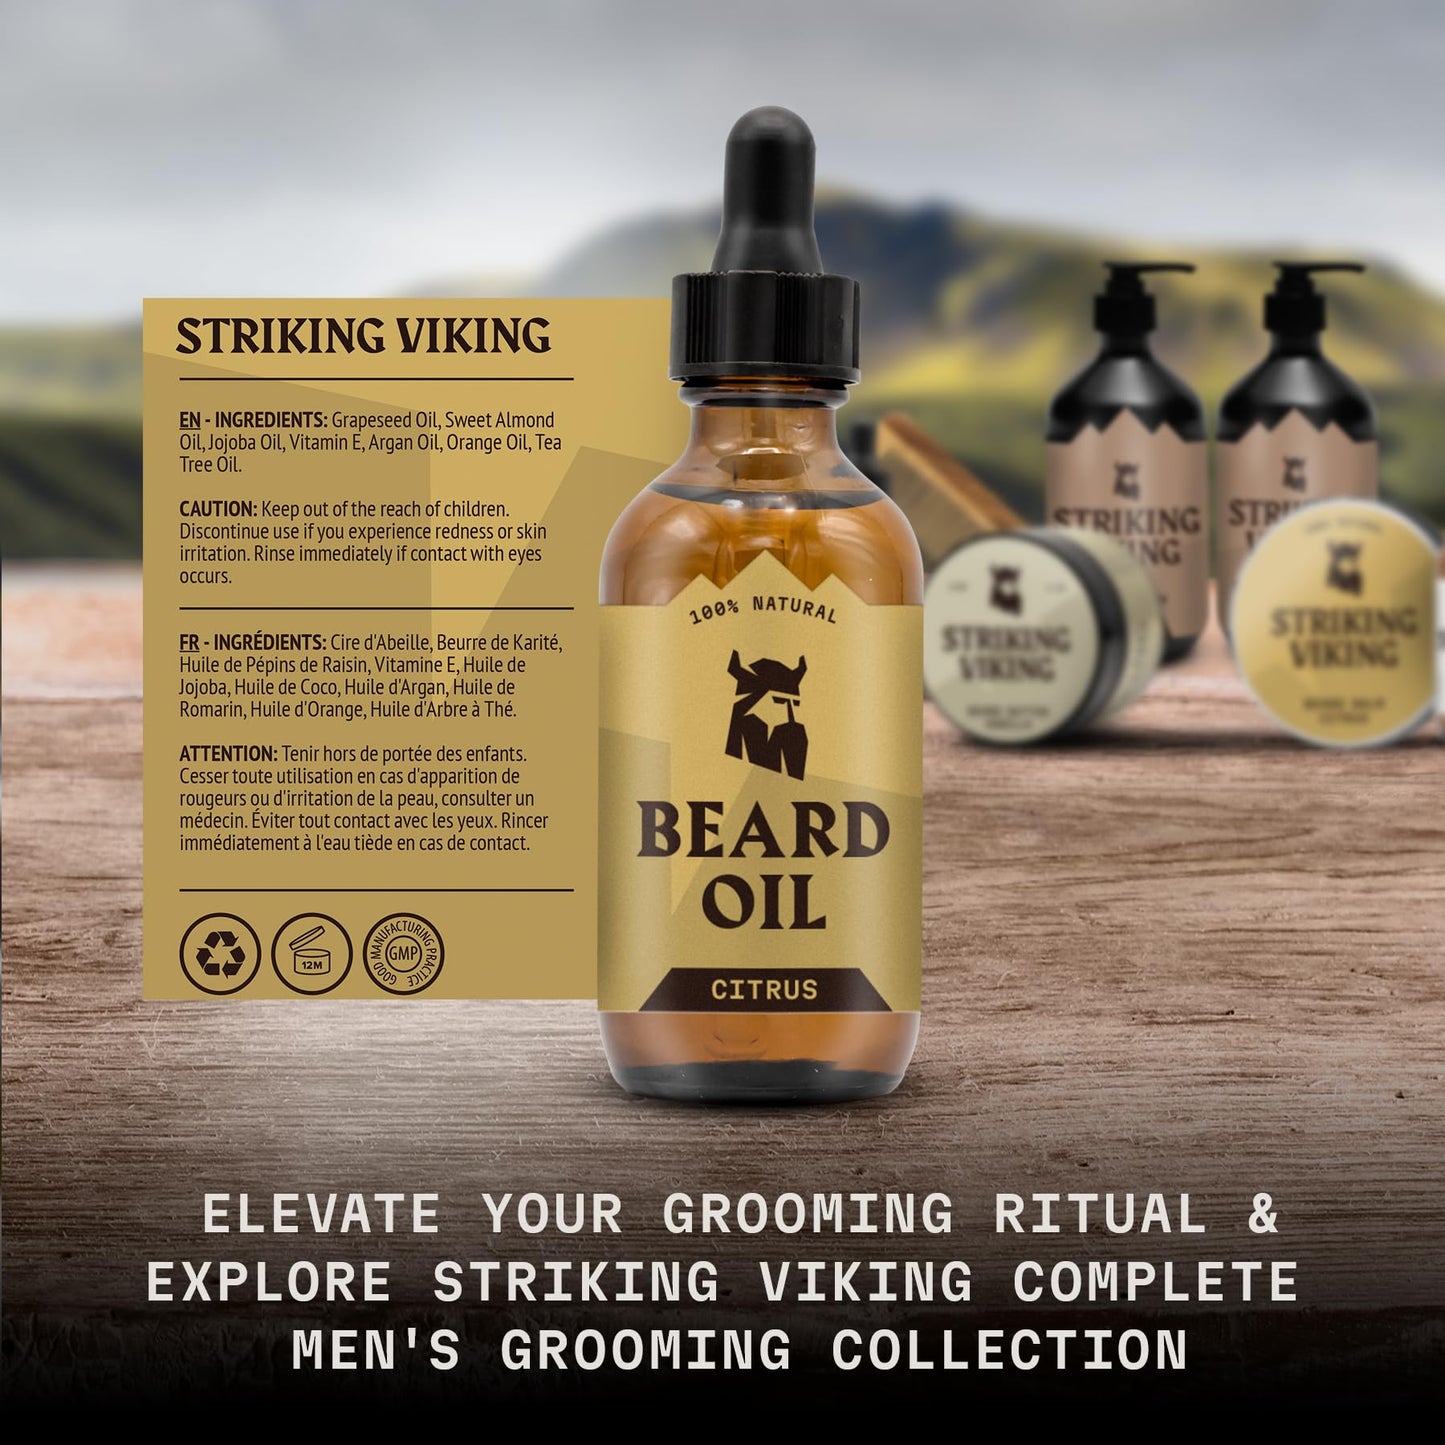 Striking Viking Scented Beard Oil Conditioner for Men (Large 2 oz.) - Naturally Derived Formula with Tea Tree, Argan and Jojoba Oils with Citrus Scent - Softens, Smooths & Strengthens Beard Growth